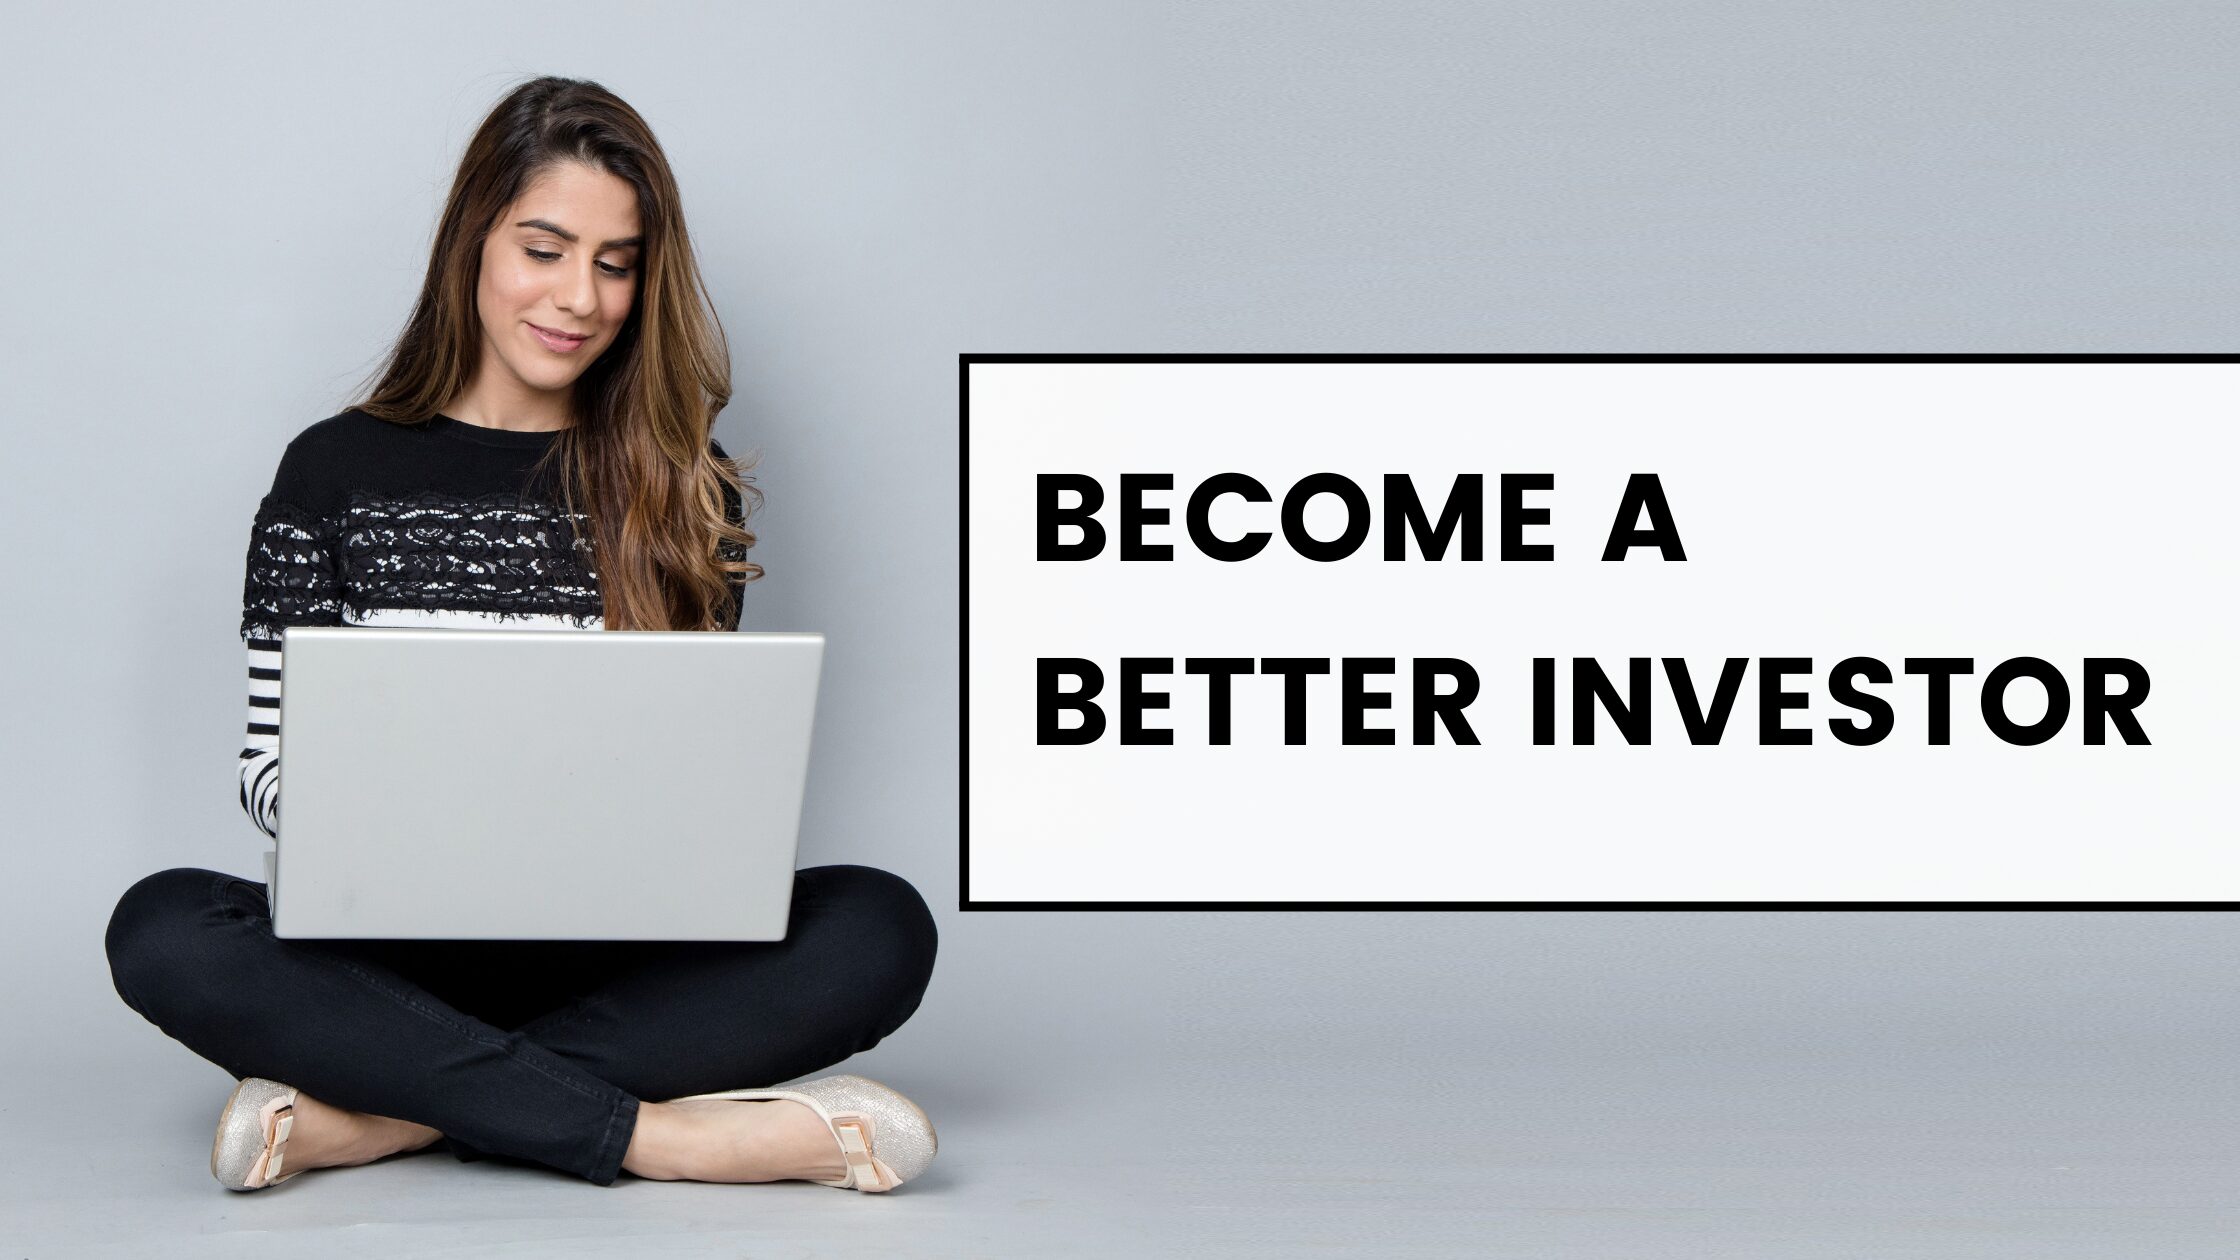 Tips That Will Help You Become a Better Investor Do you feel as though you aren’t a good investor? If so then there are things you can do to try and turn things around. This guide will show you what you can do to try and turn things around, so you can become better at what you do while taking on less risk